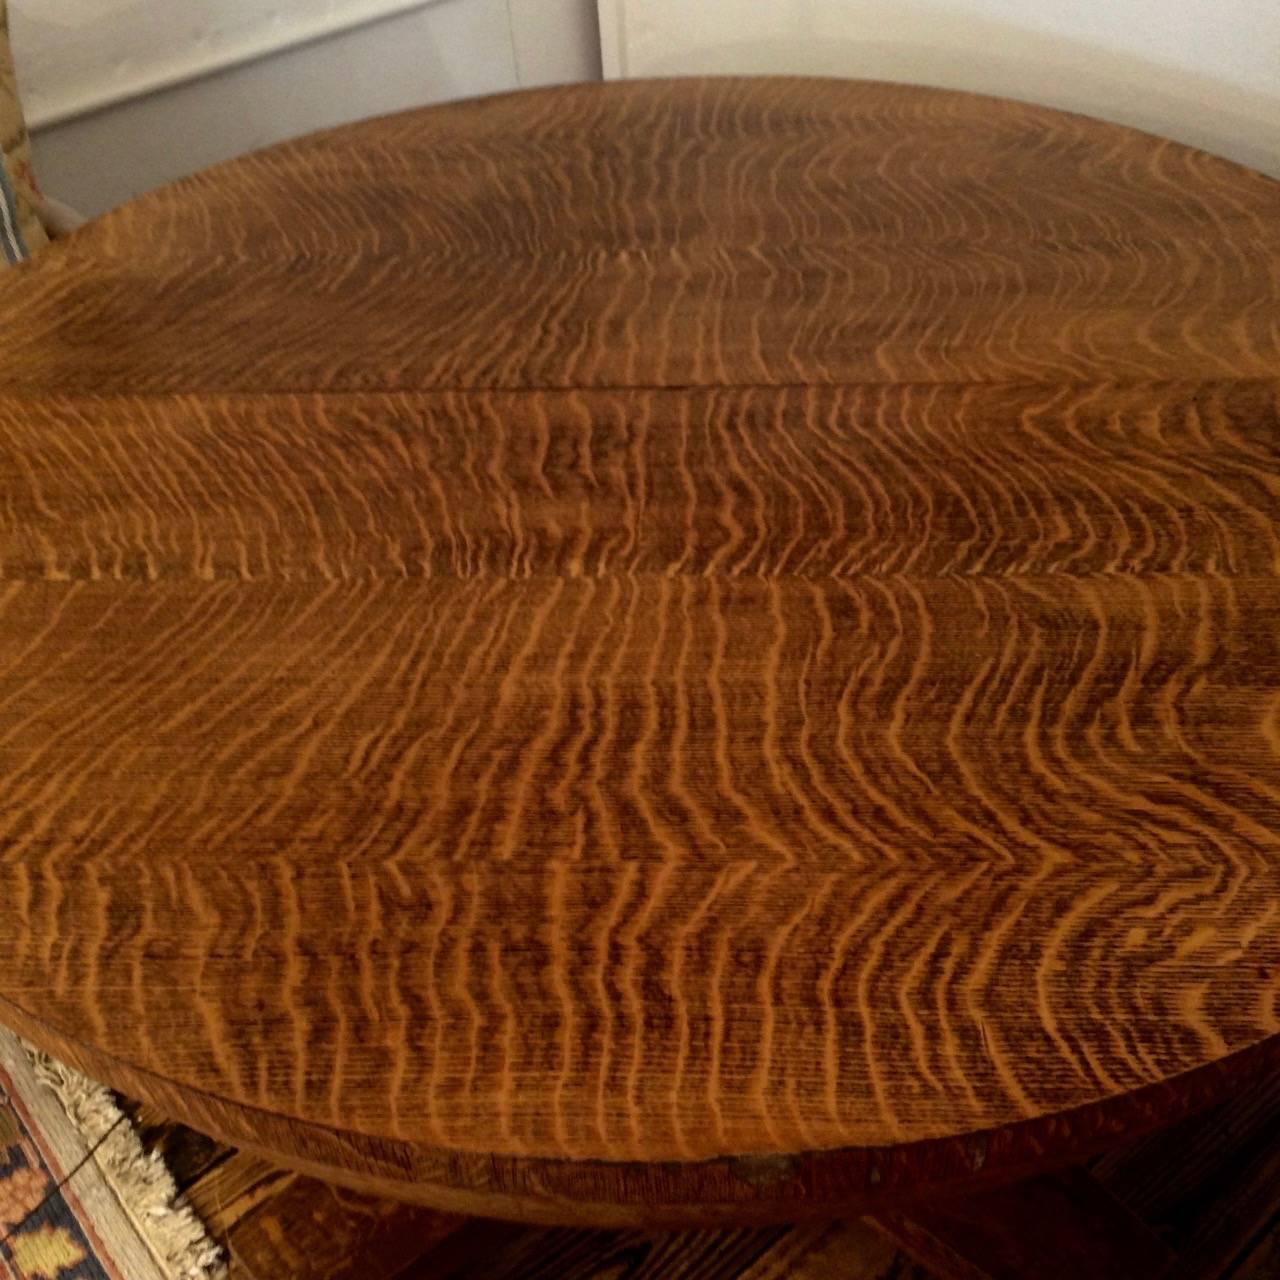 A charming, early 20th century, round dining table in the Arts and Crafts style with a gorgeous grained wood, center pedestal. It opens to receive two leaves, each 12.25 wide, so fully extended becomes a 69.75 oval. Leaves are not refinished to